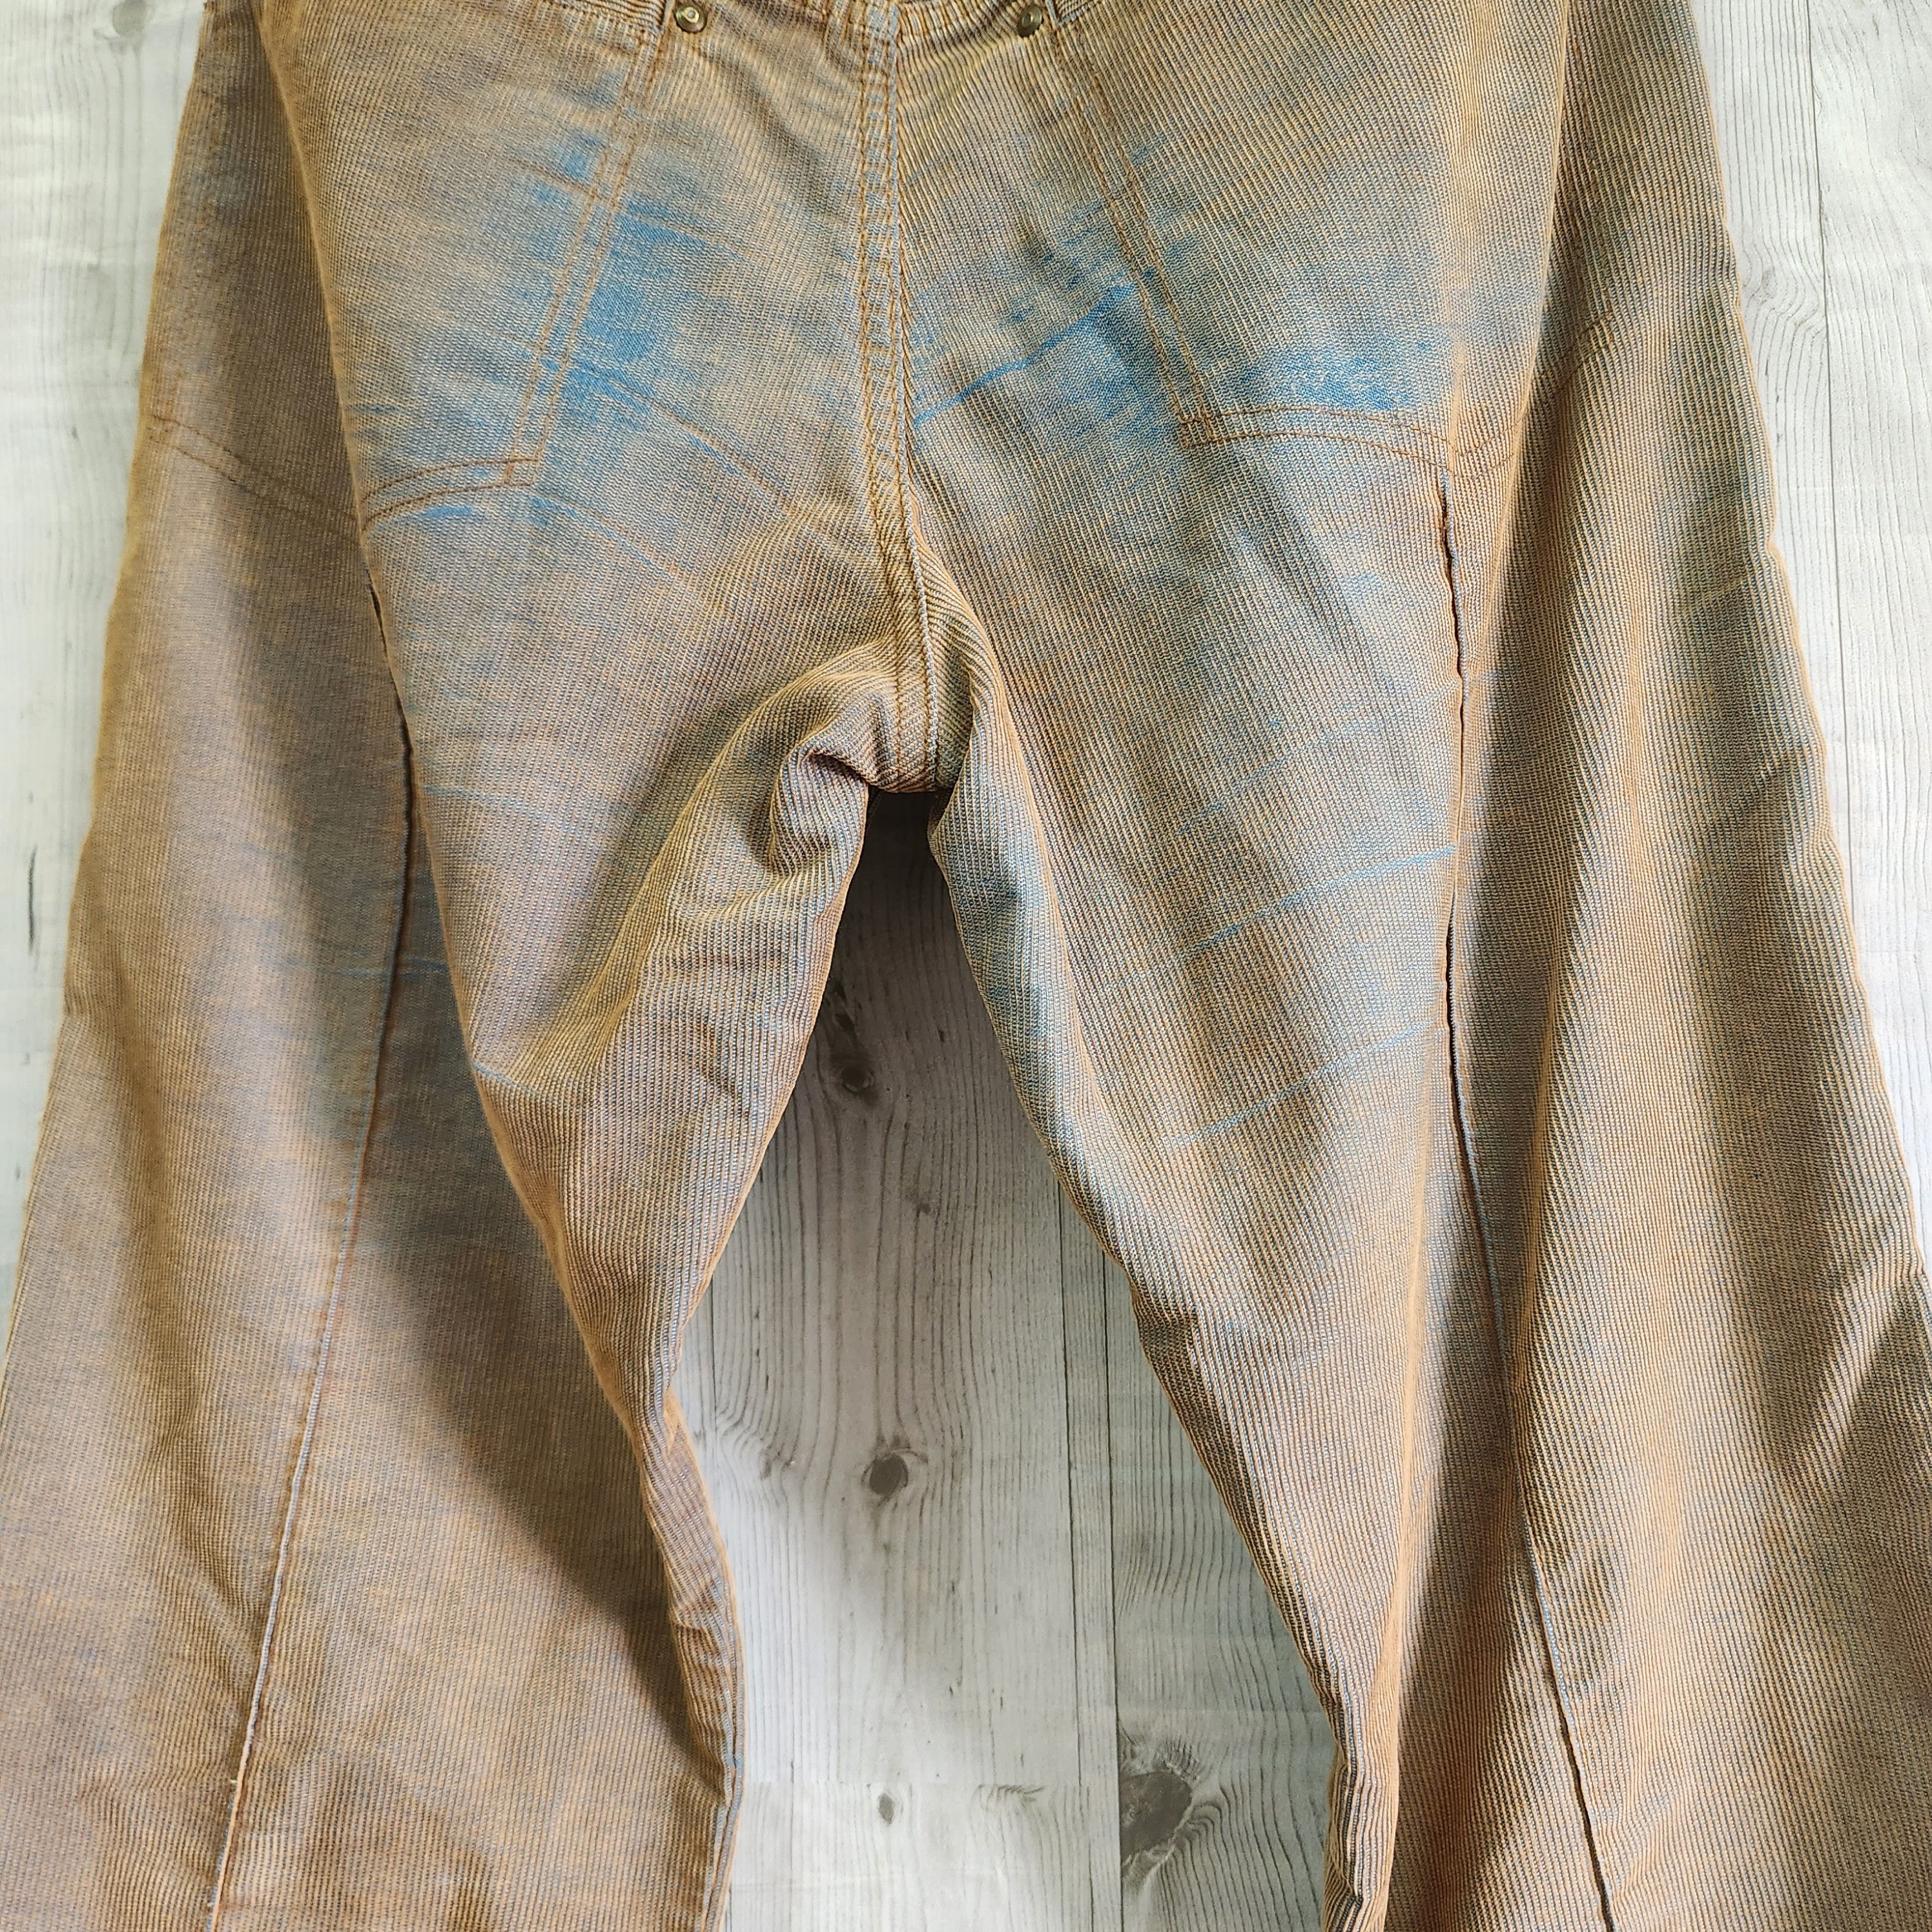 Key Acquisitions - Acquiesce Distressed Faded Bluish Denim Jeans Japanese - 14